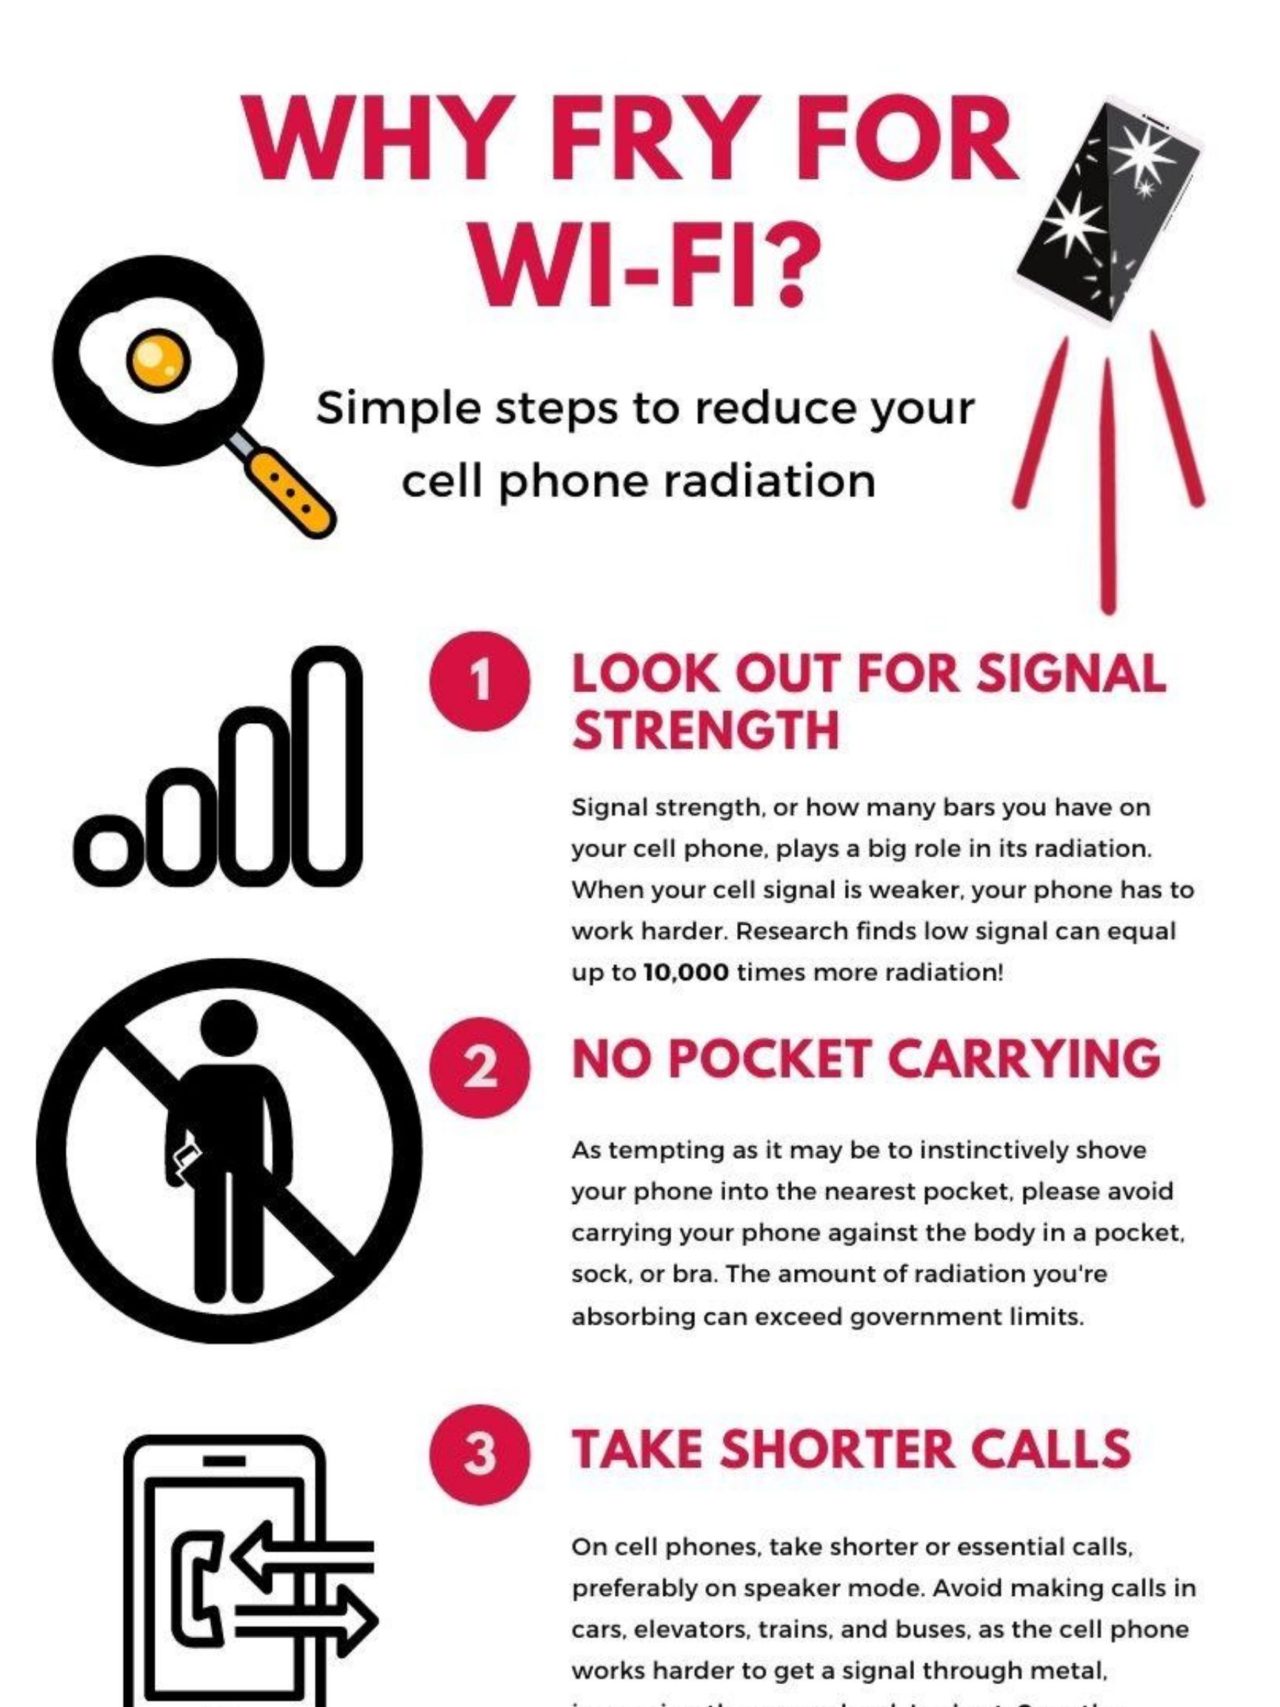 research topics on cell phone radiation